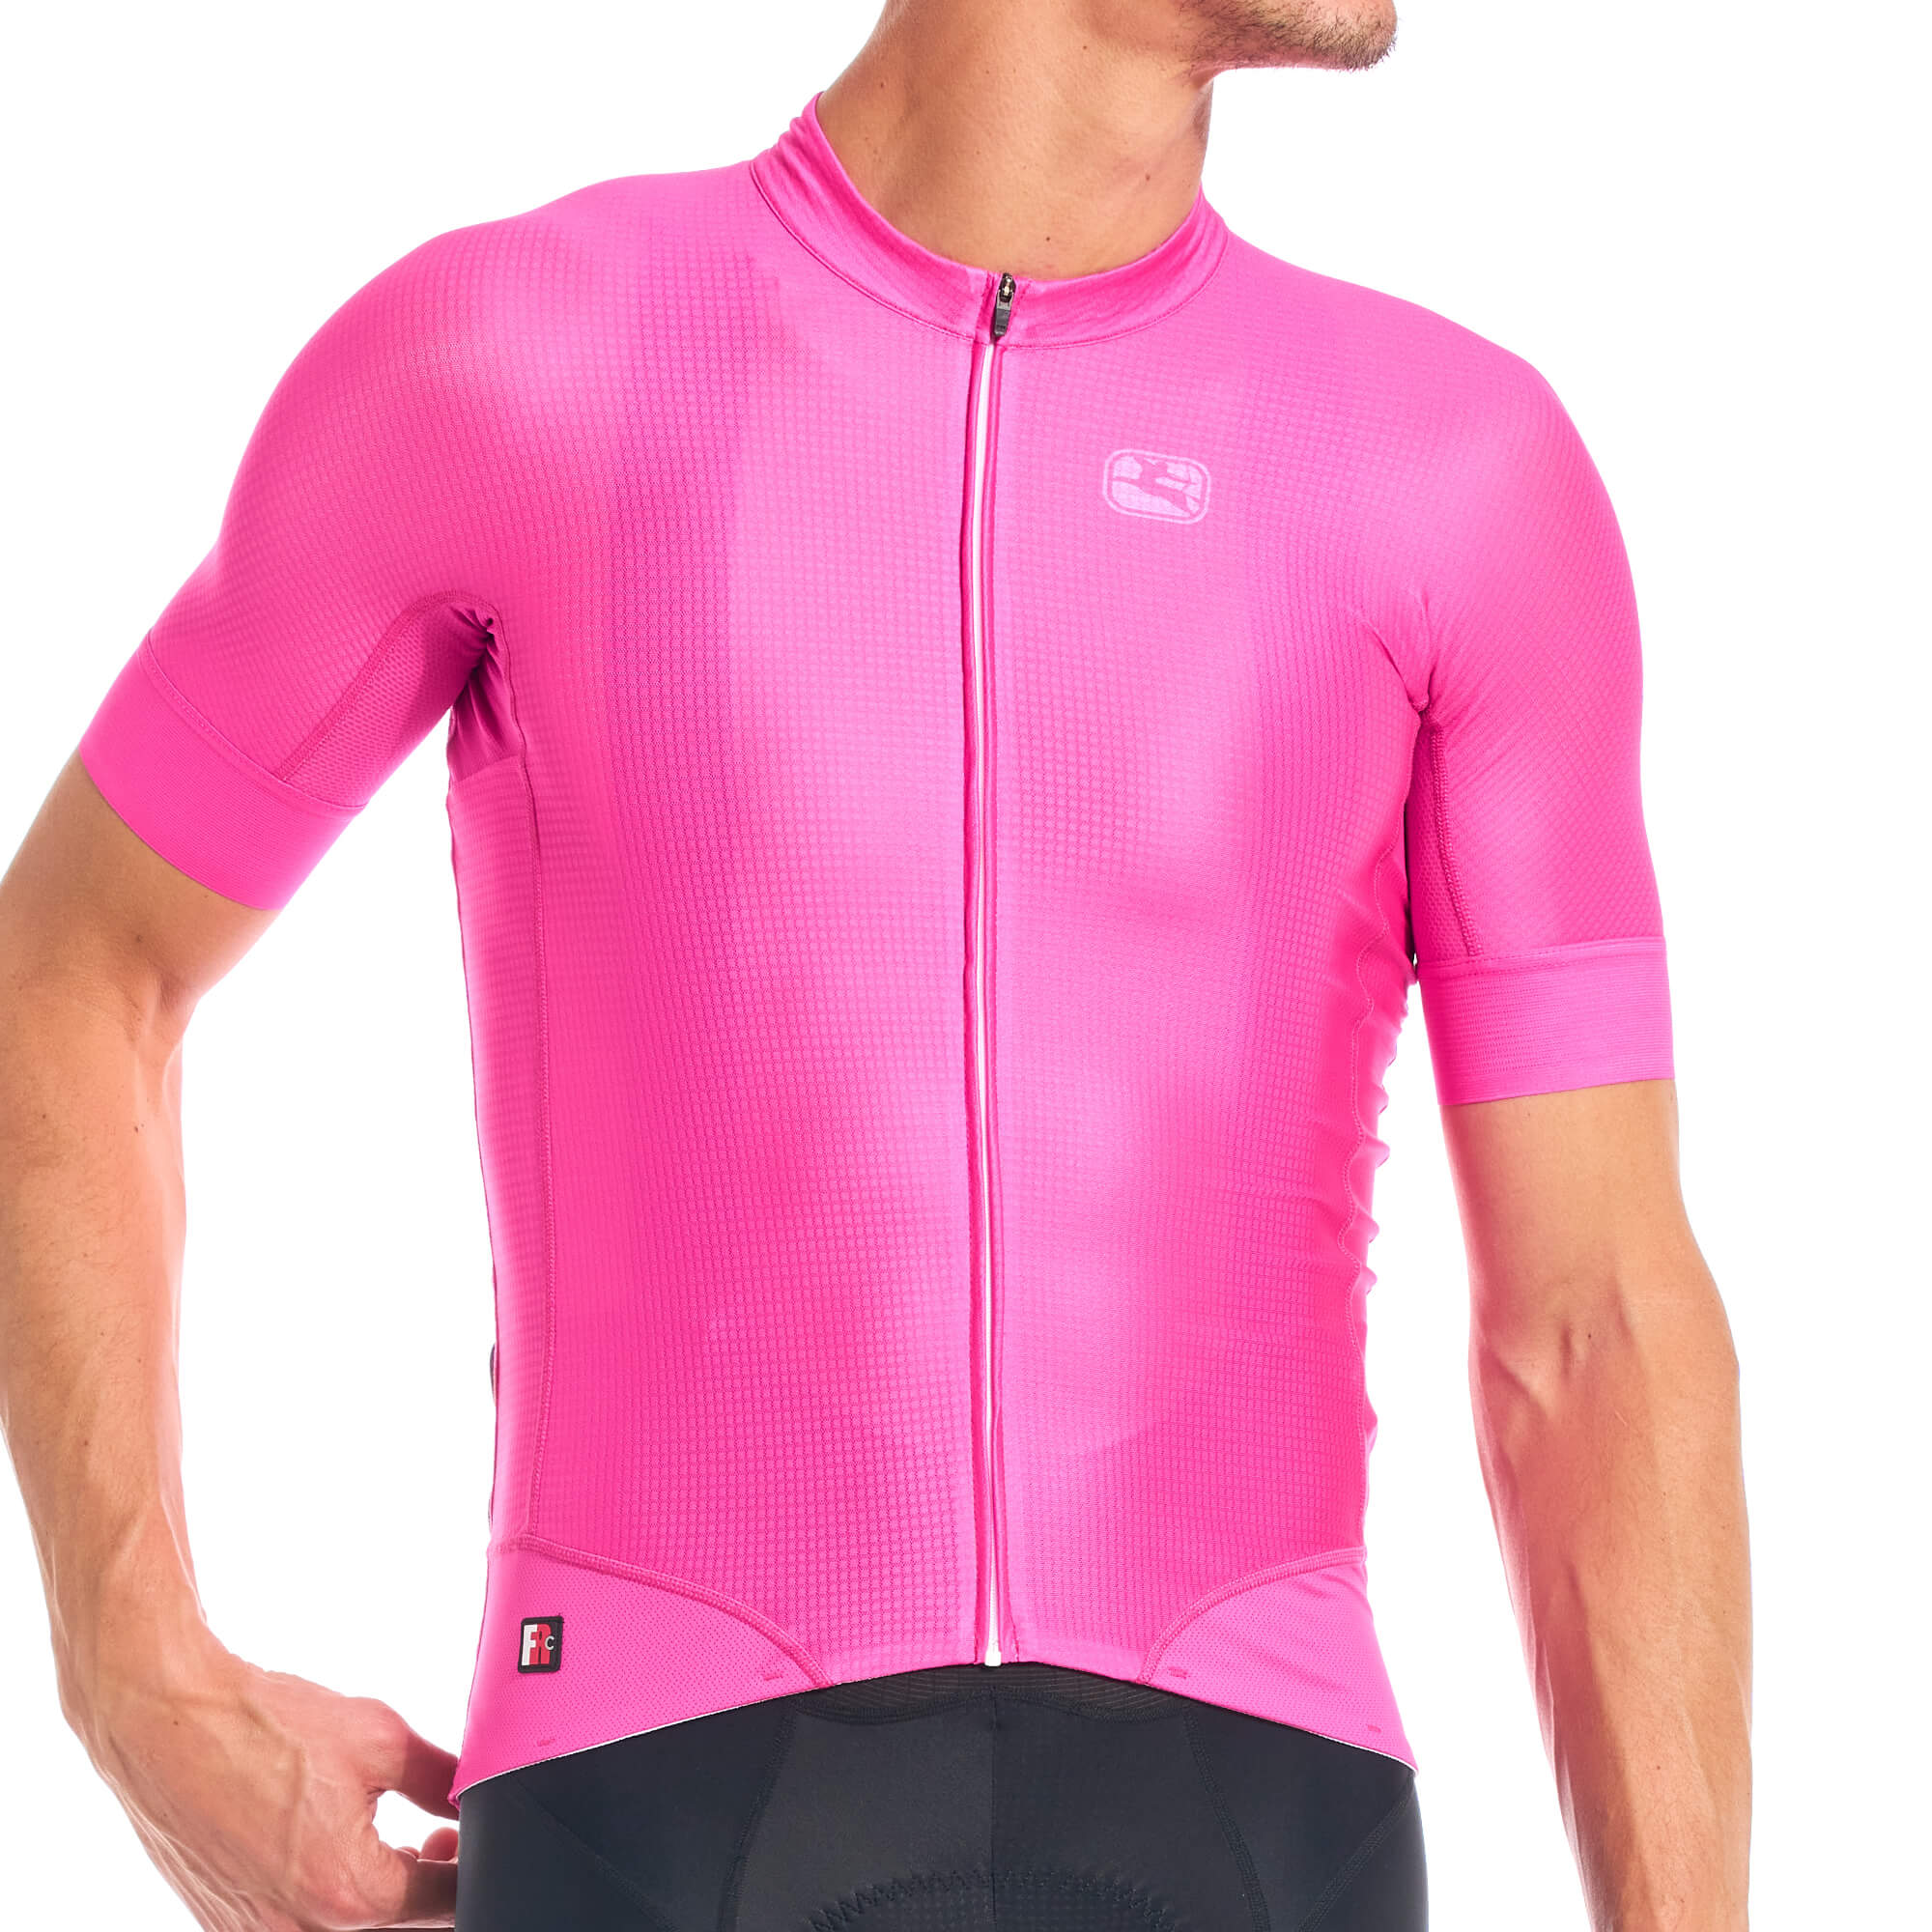 Giordana Men's FR-C Pro Jersey Neon Orchid - X-Large